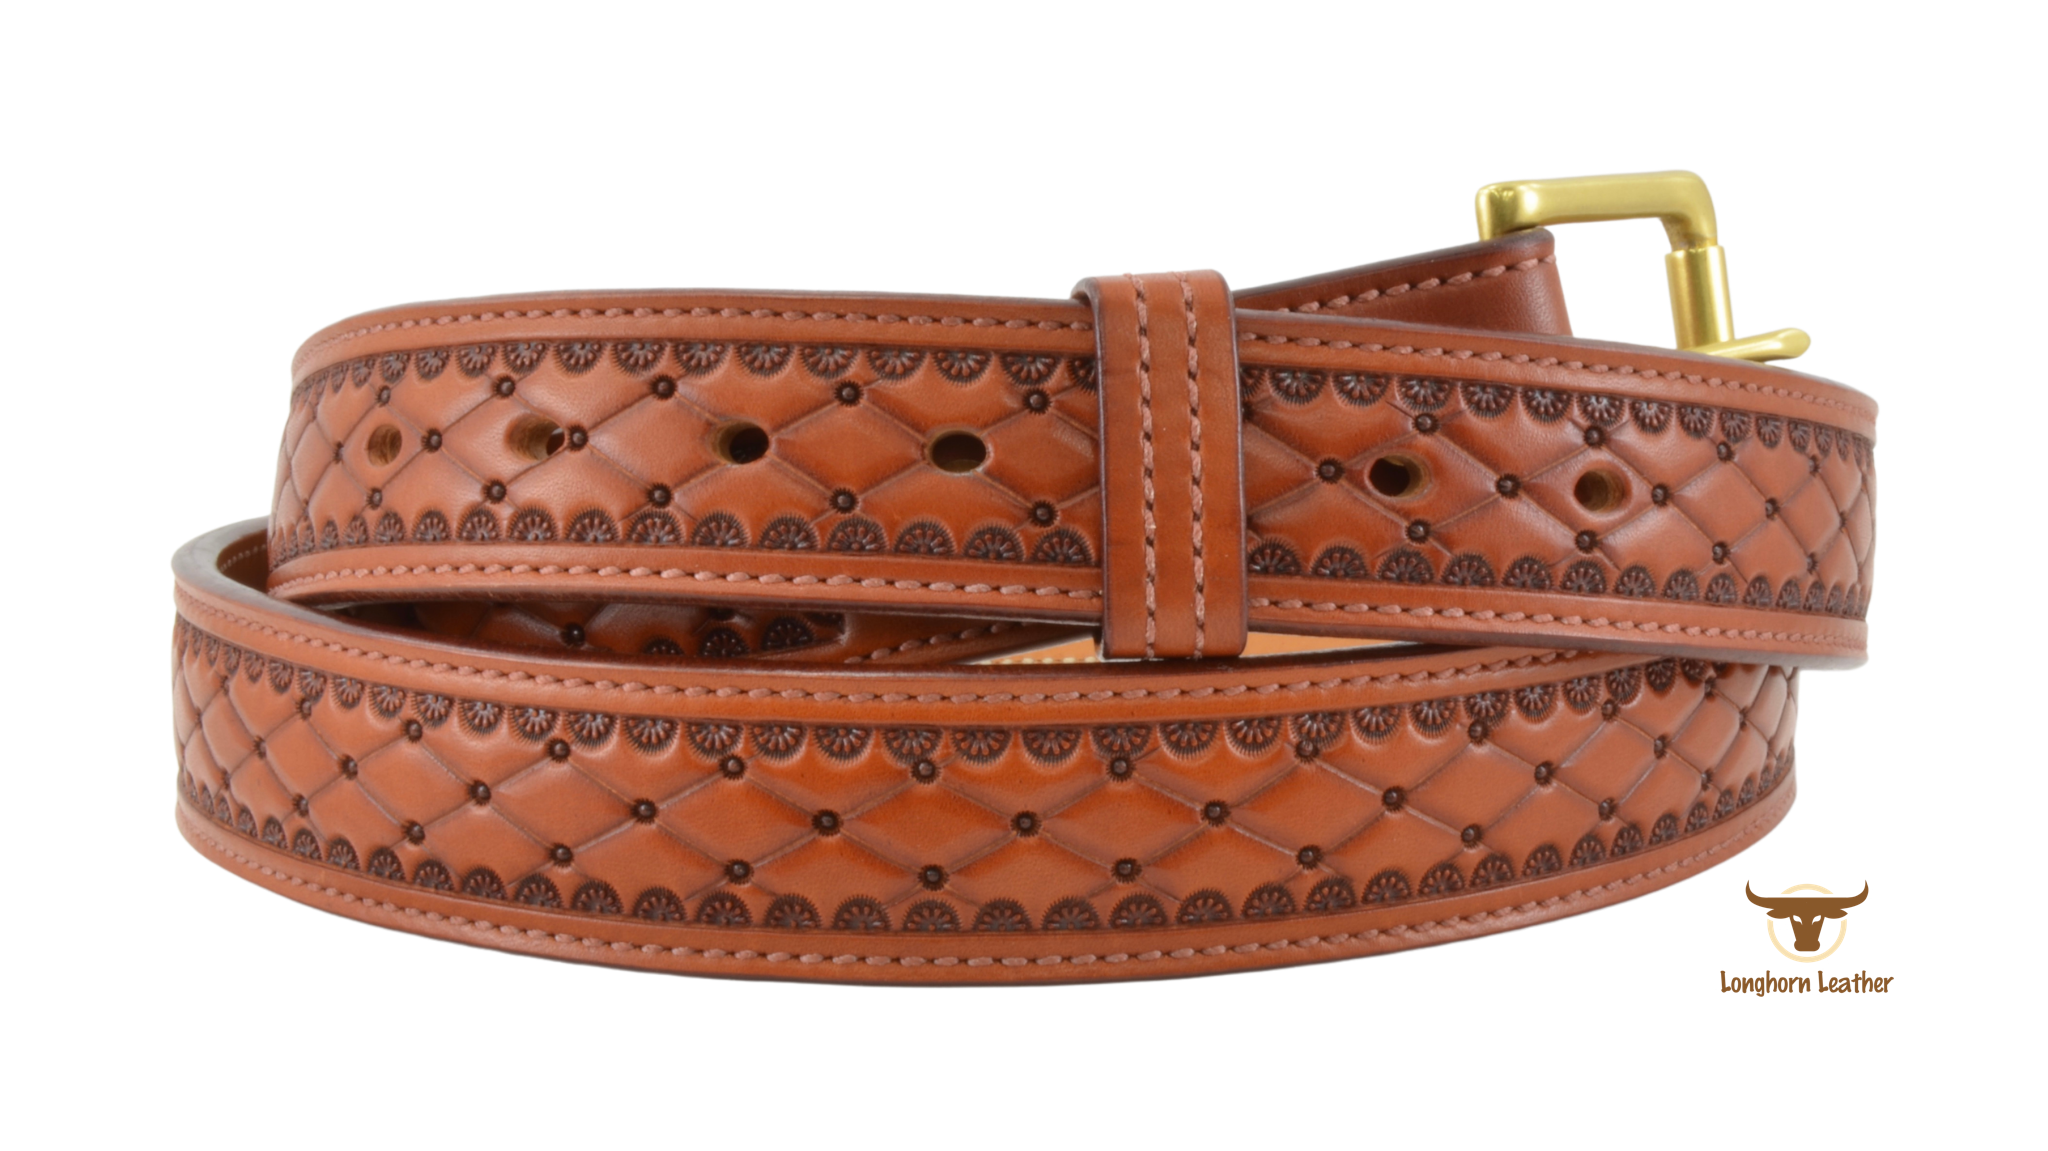 Custom leather belt featuring the "San Carlos" design.  Individually handcrafted at Longhorn Leather AZ